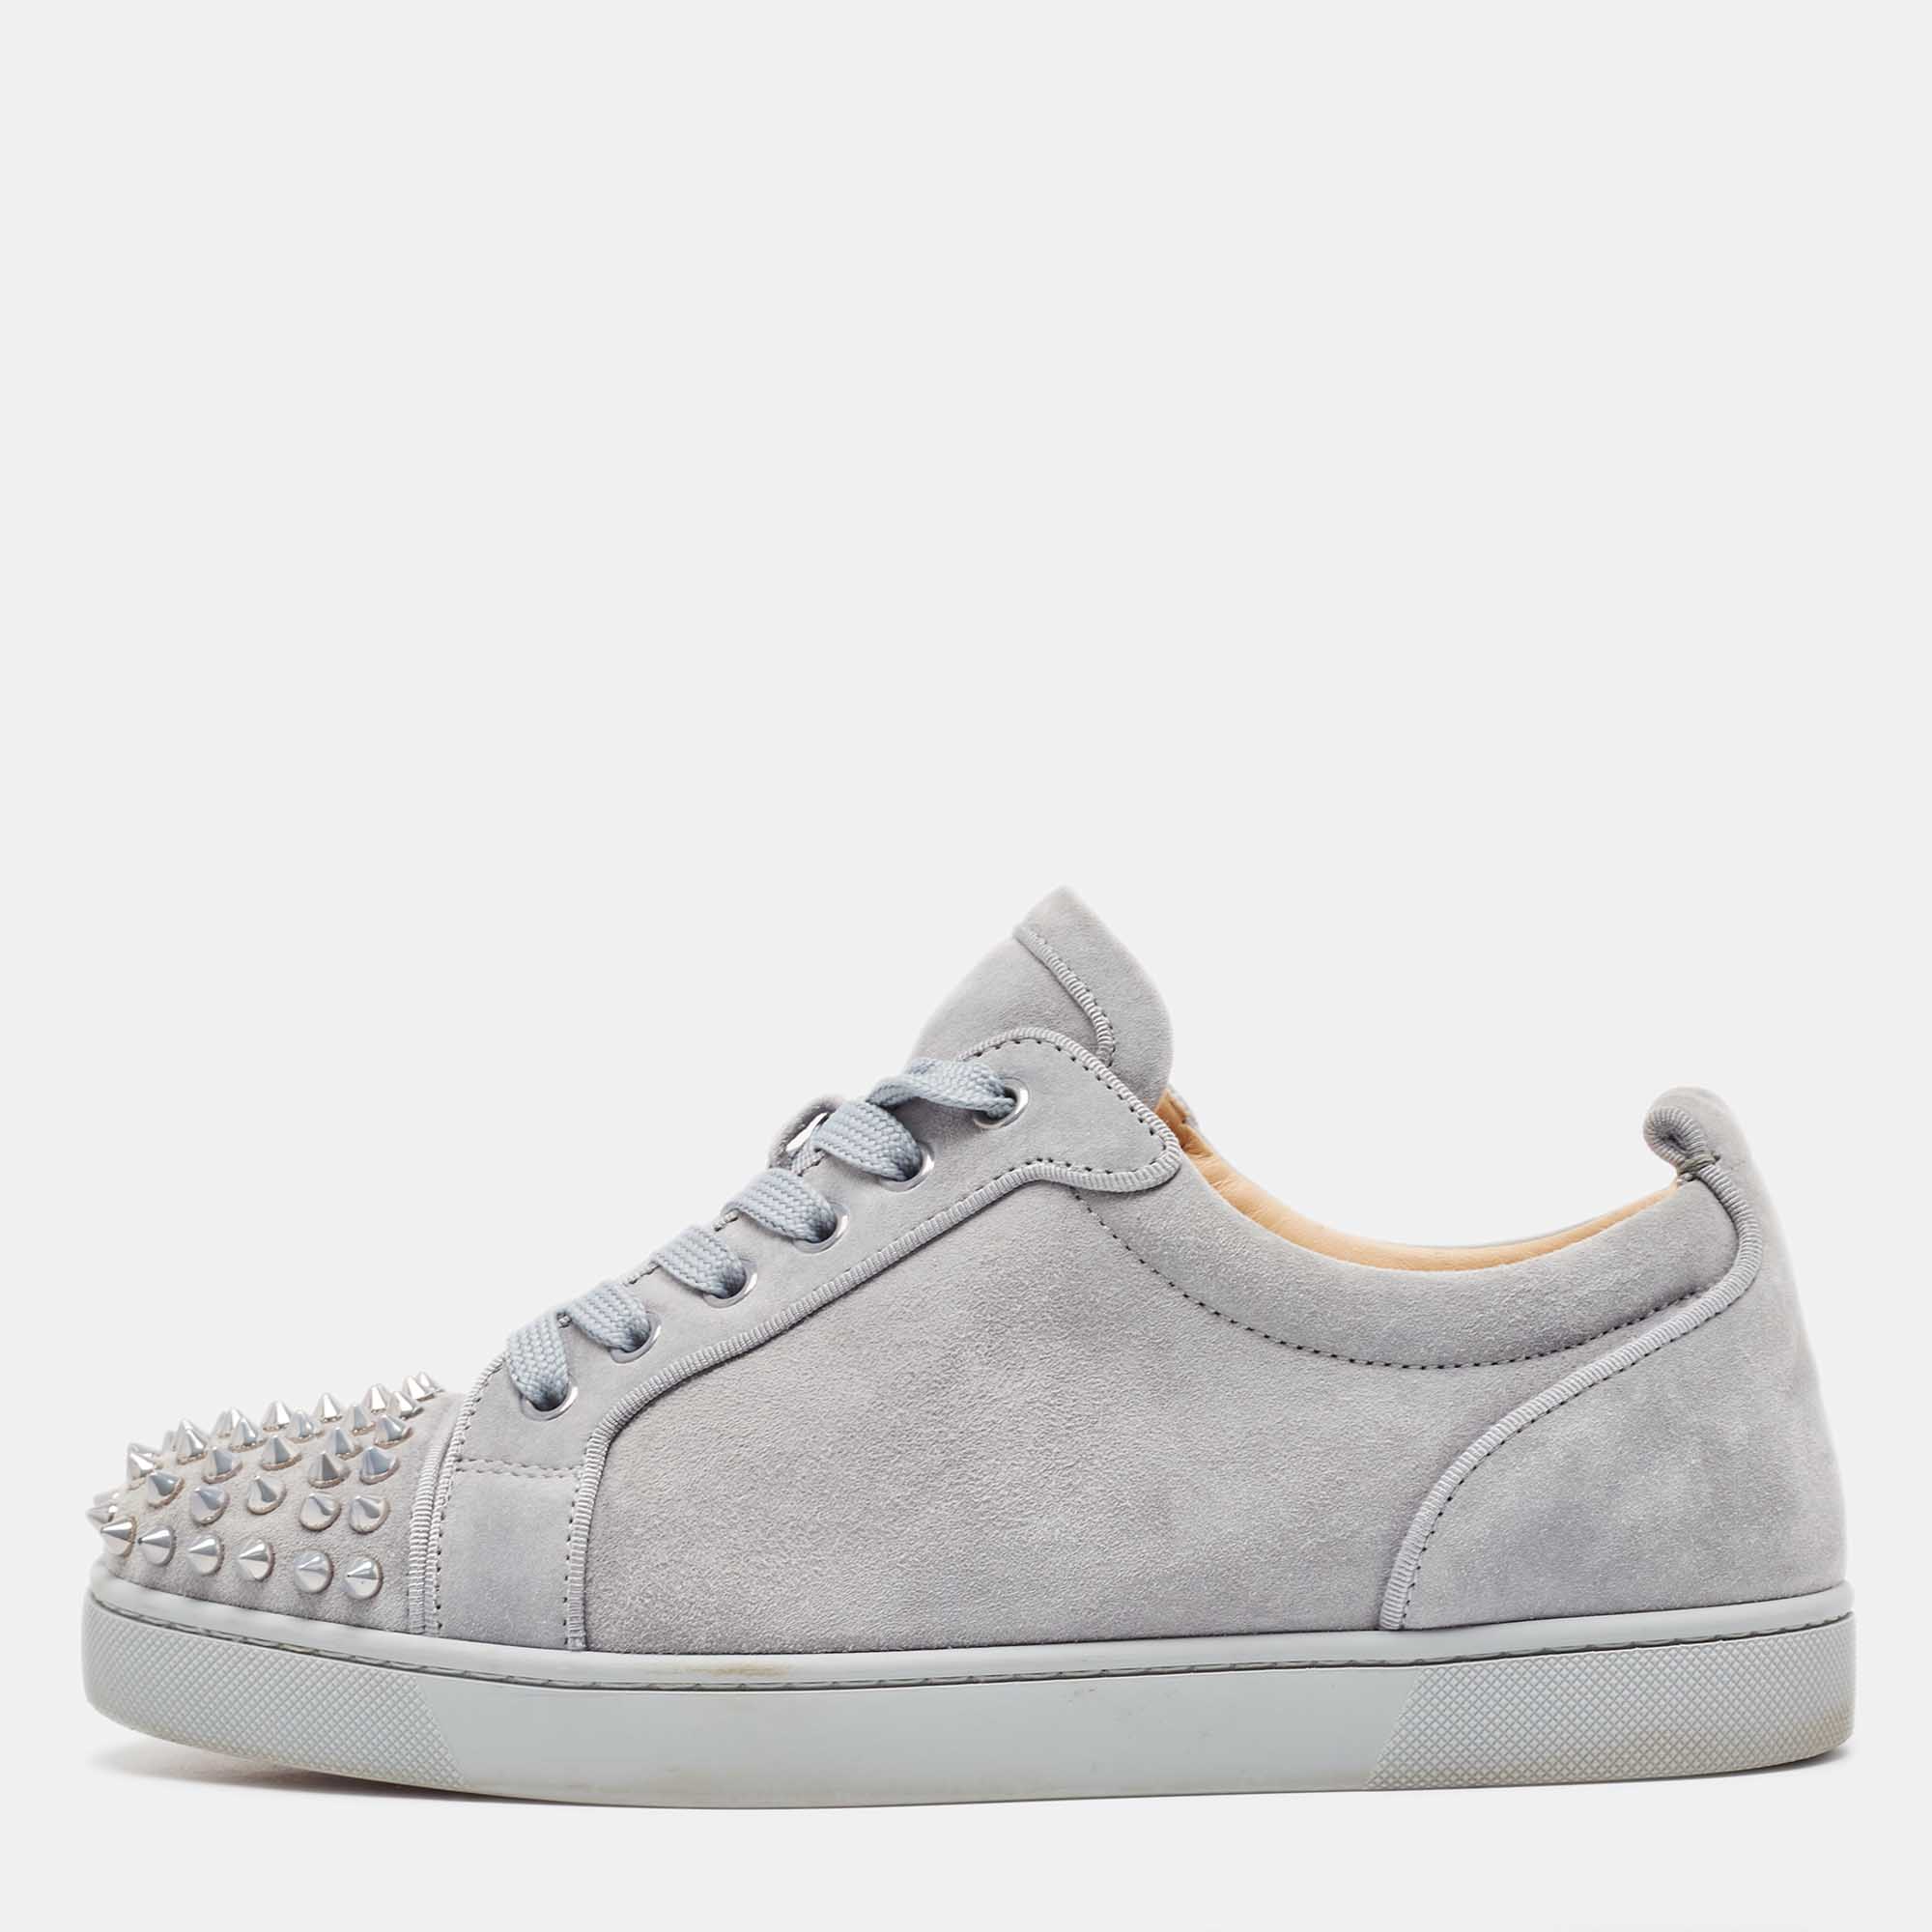 Louis junior spike low trainers Christian Louboutin Grey size 45